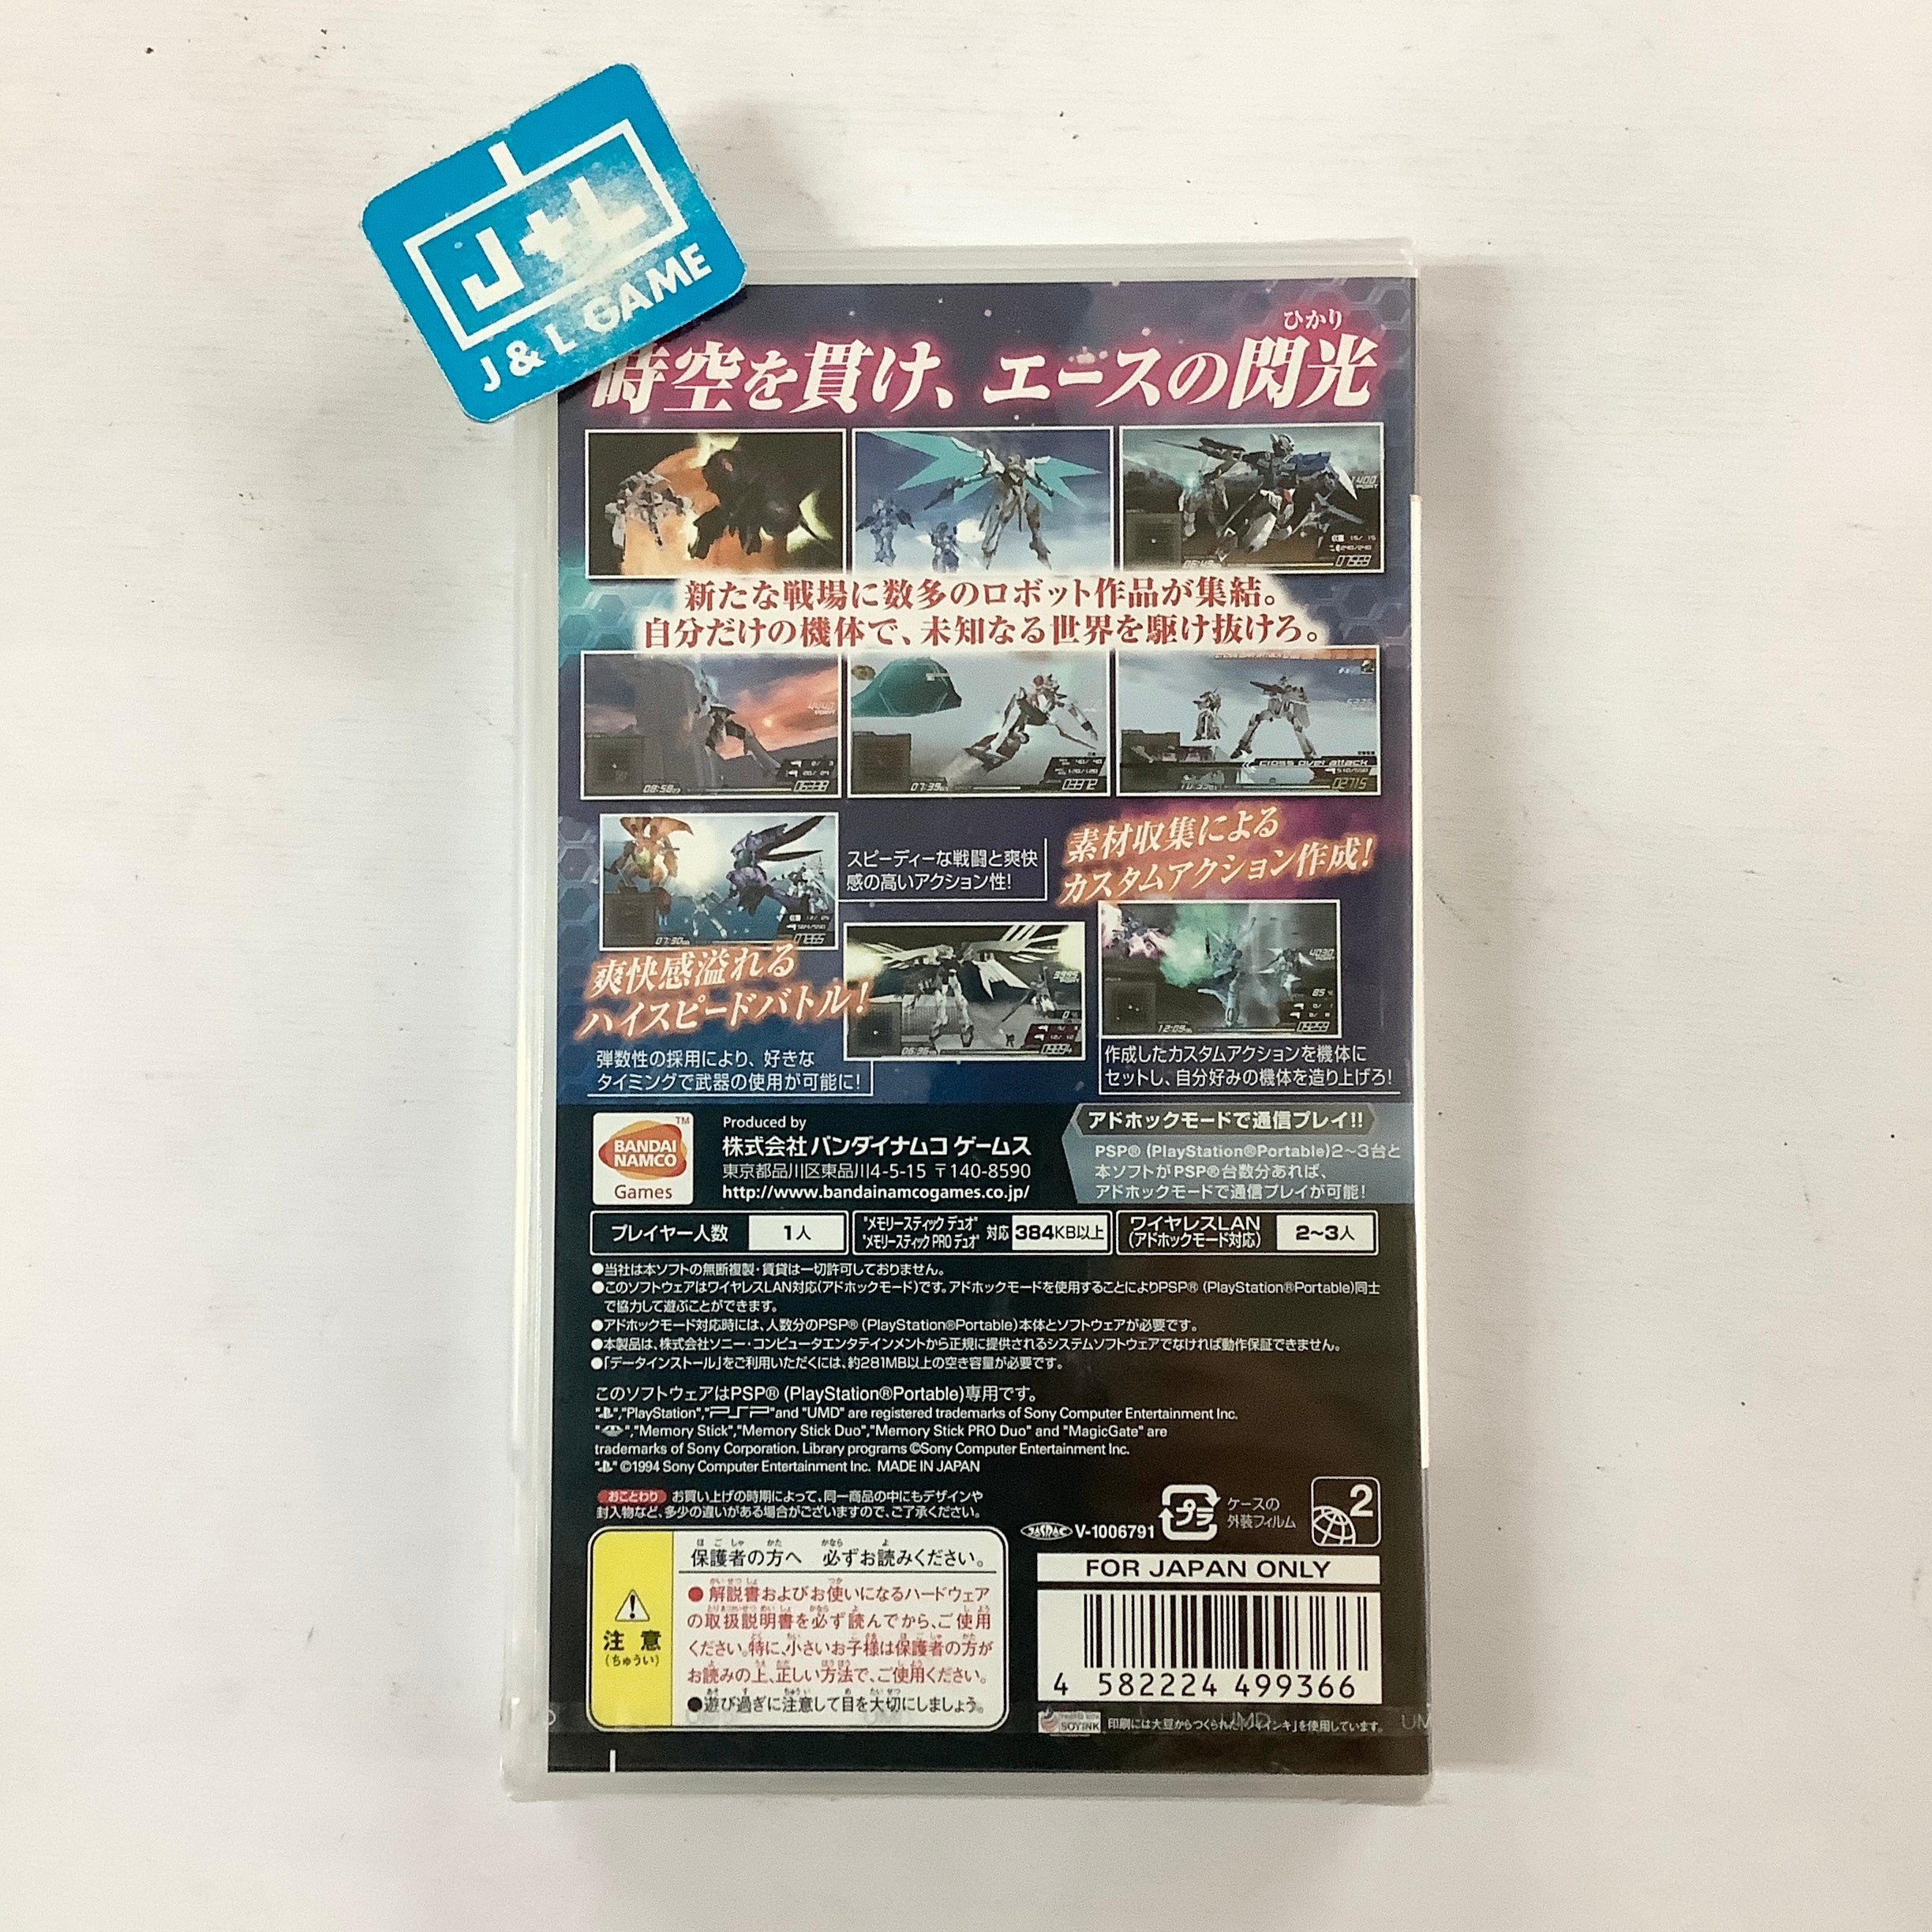 Another Century's Episode Portable - Sony PSP (Japanese Import) Video Games Bandai Namco Games   